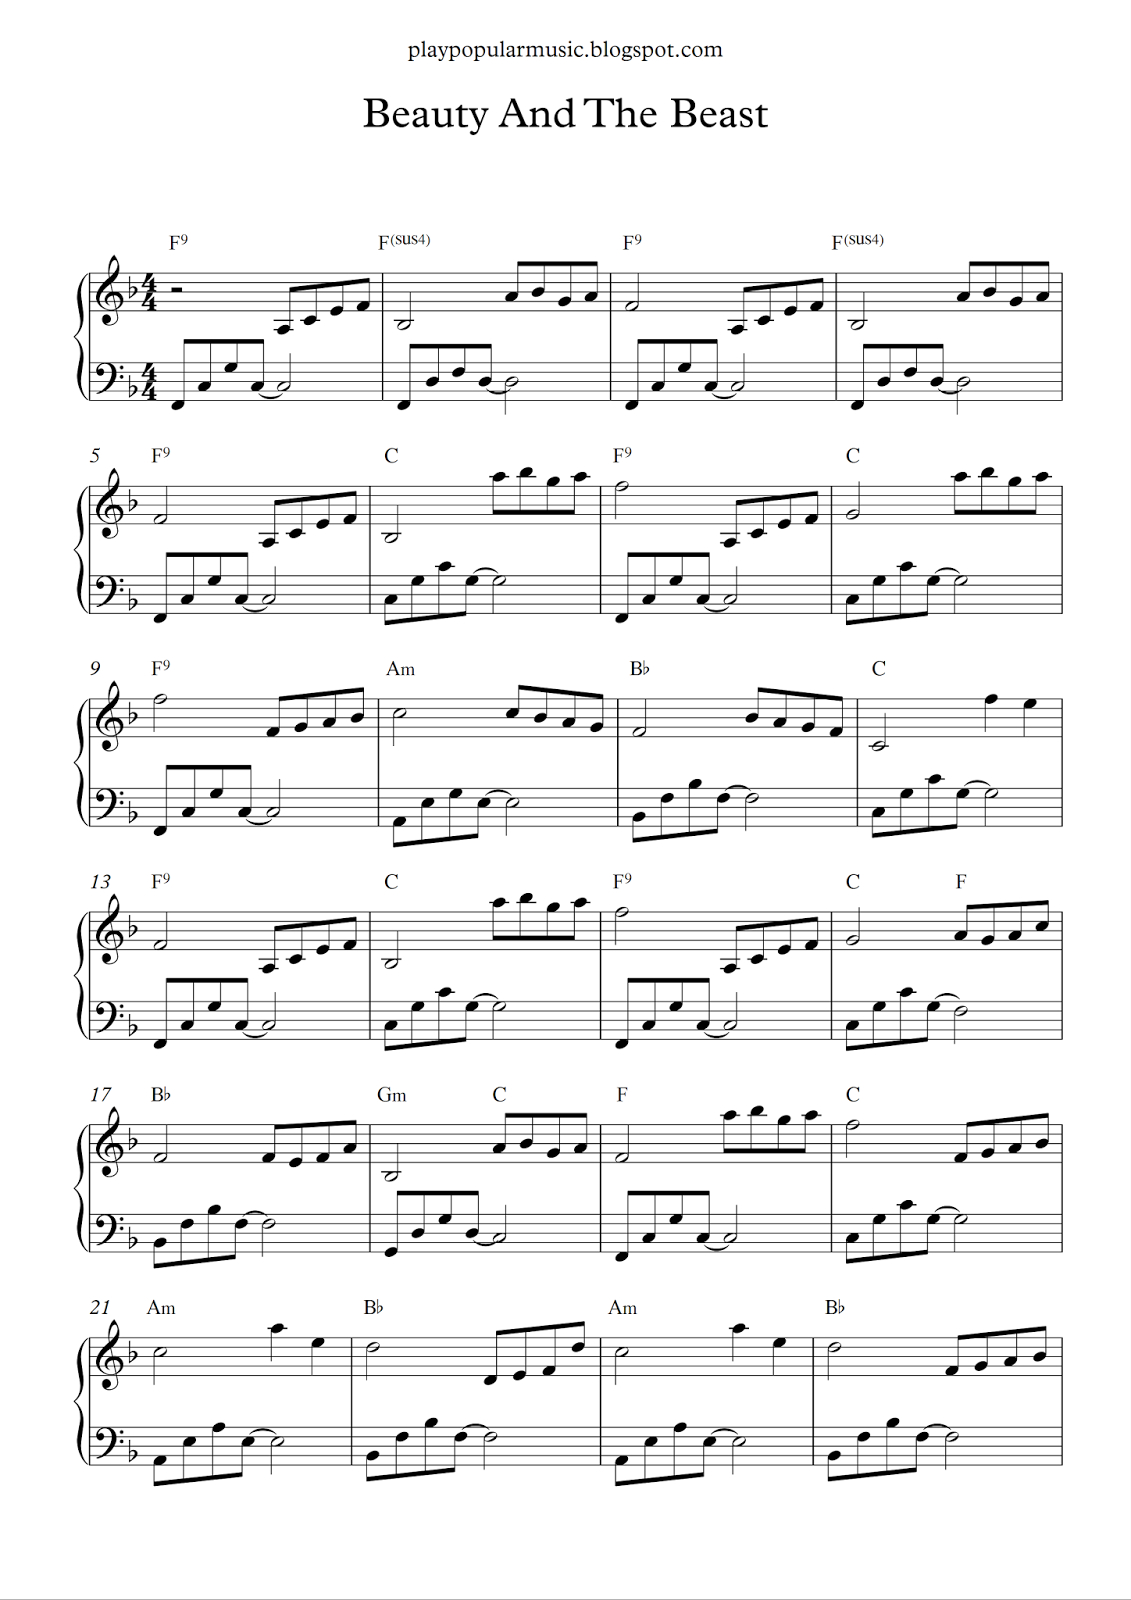 Free Piano Sheet Music: Beauty And The Beast.pdf Tale As Old As Time - Free Printable Music Sheets Pdf